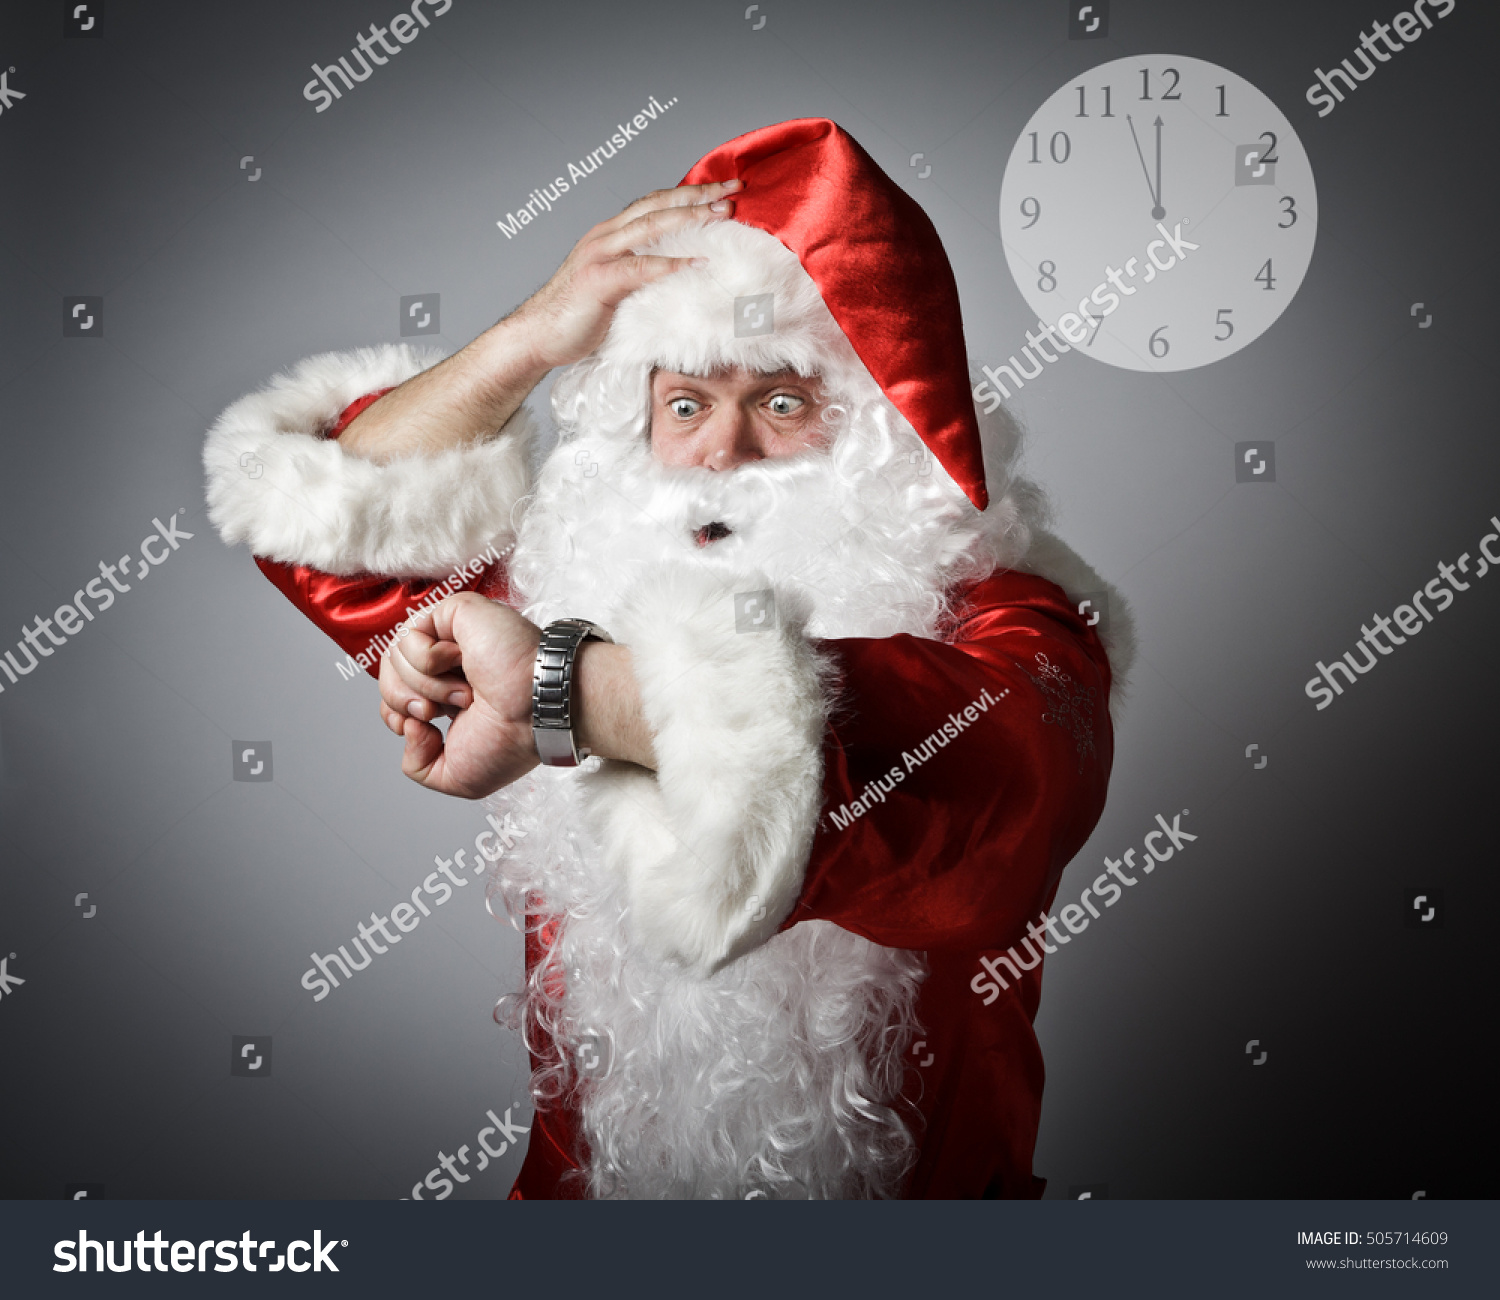 Claus gets to watch